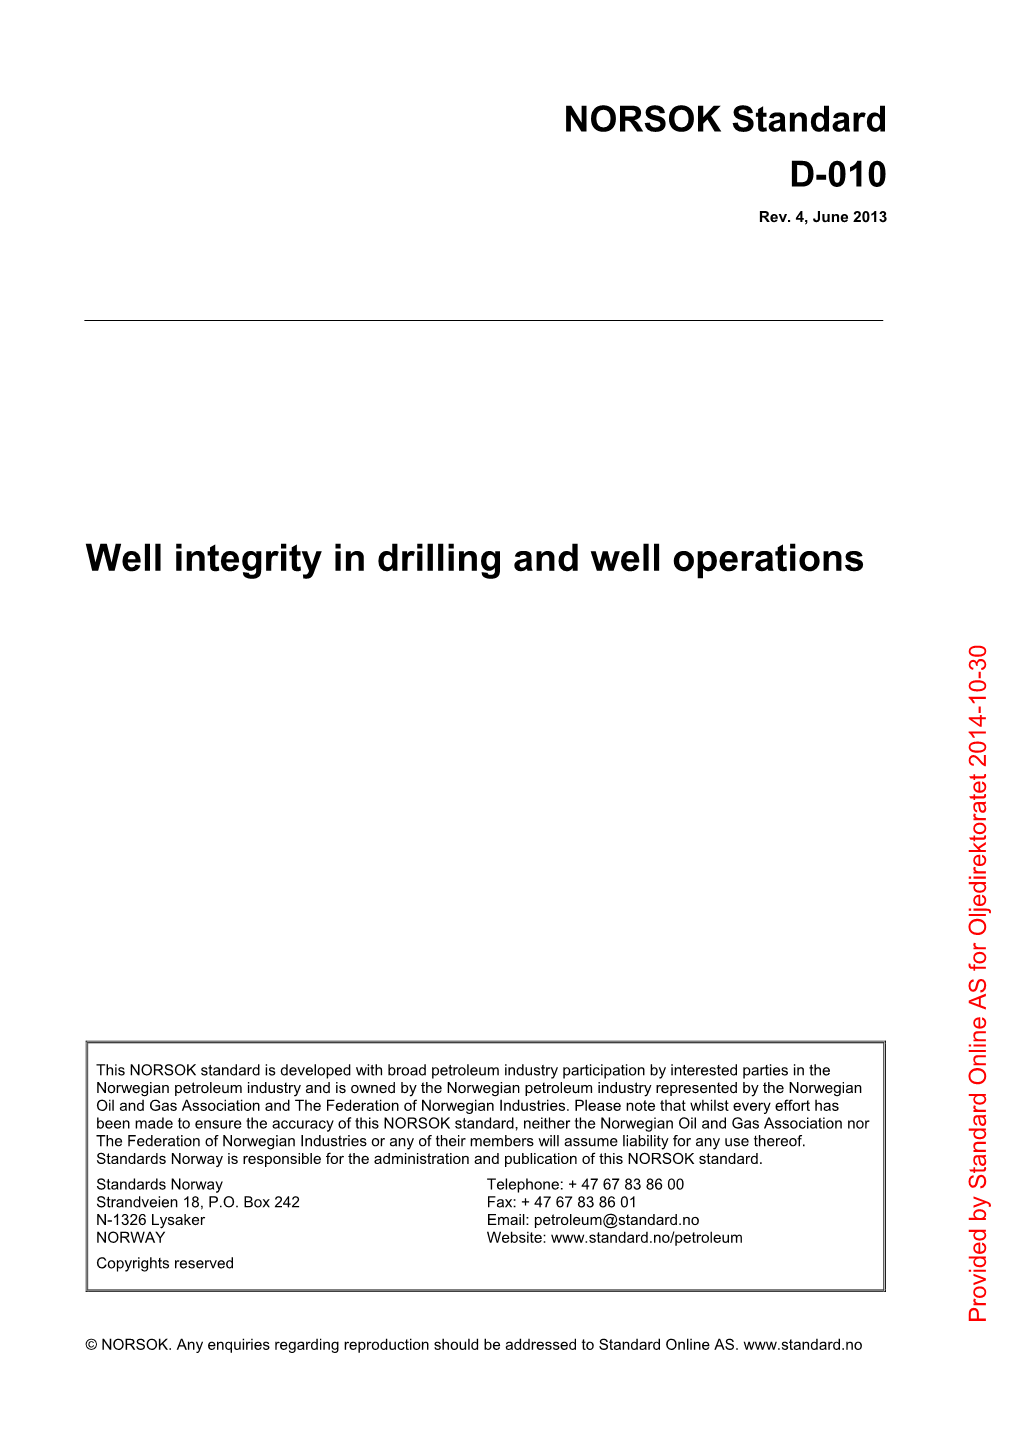 Well Integrity in Drilling and Well Operations